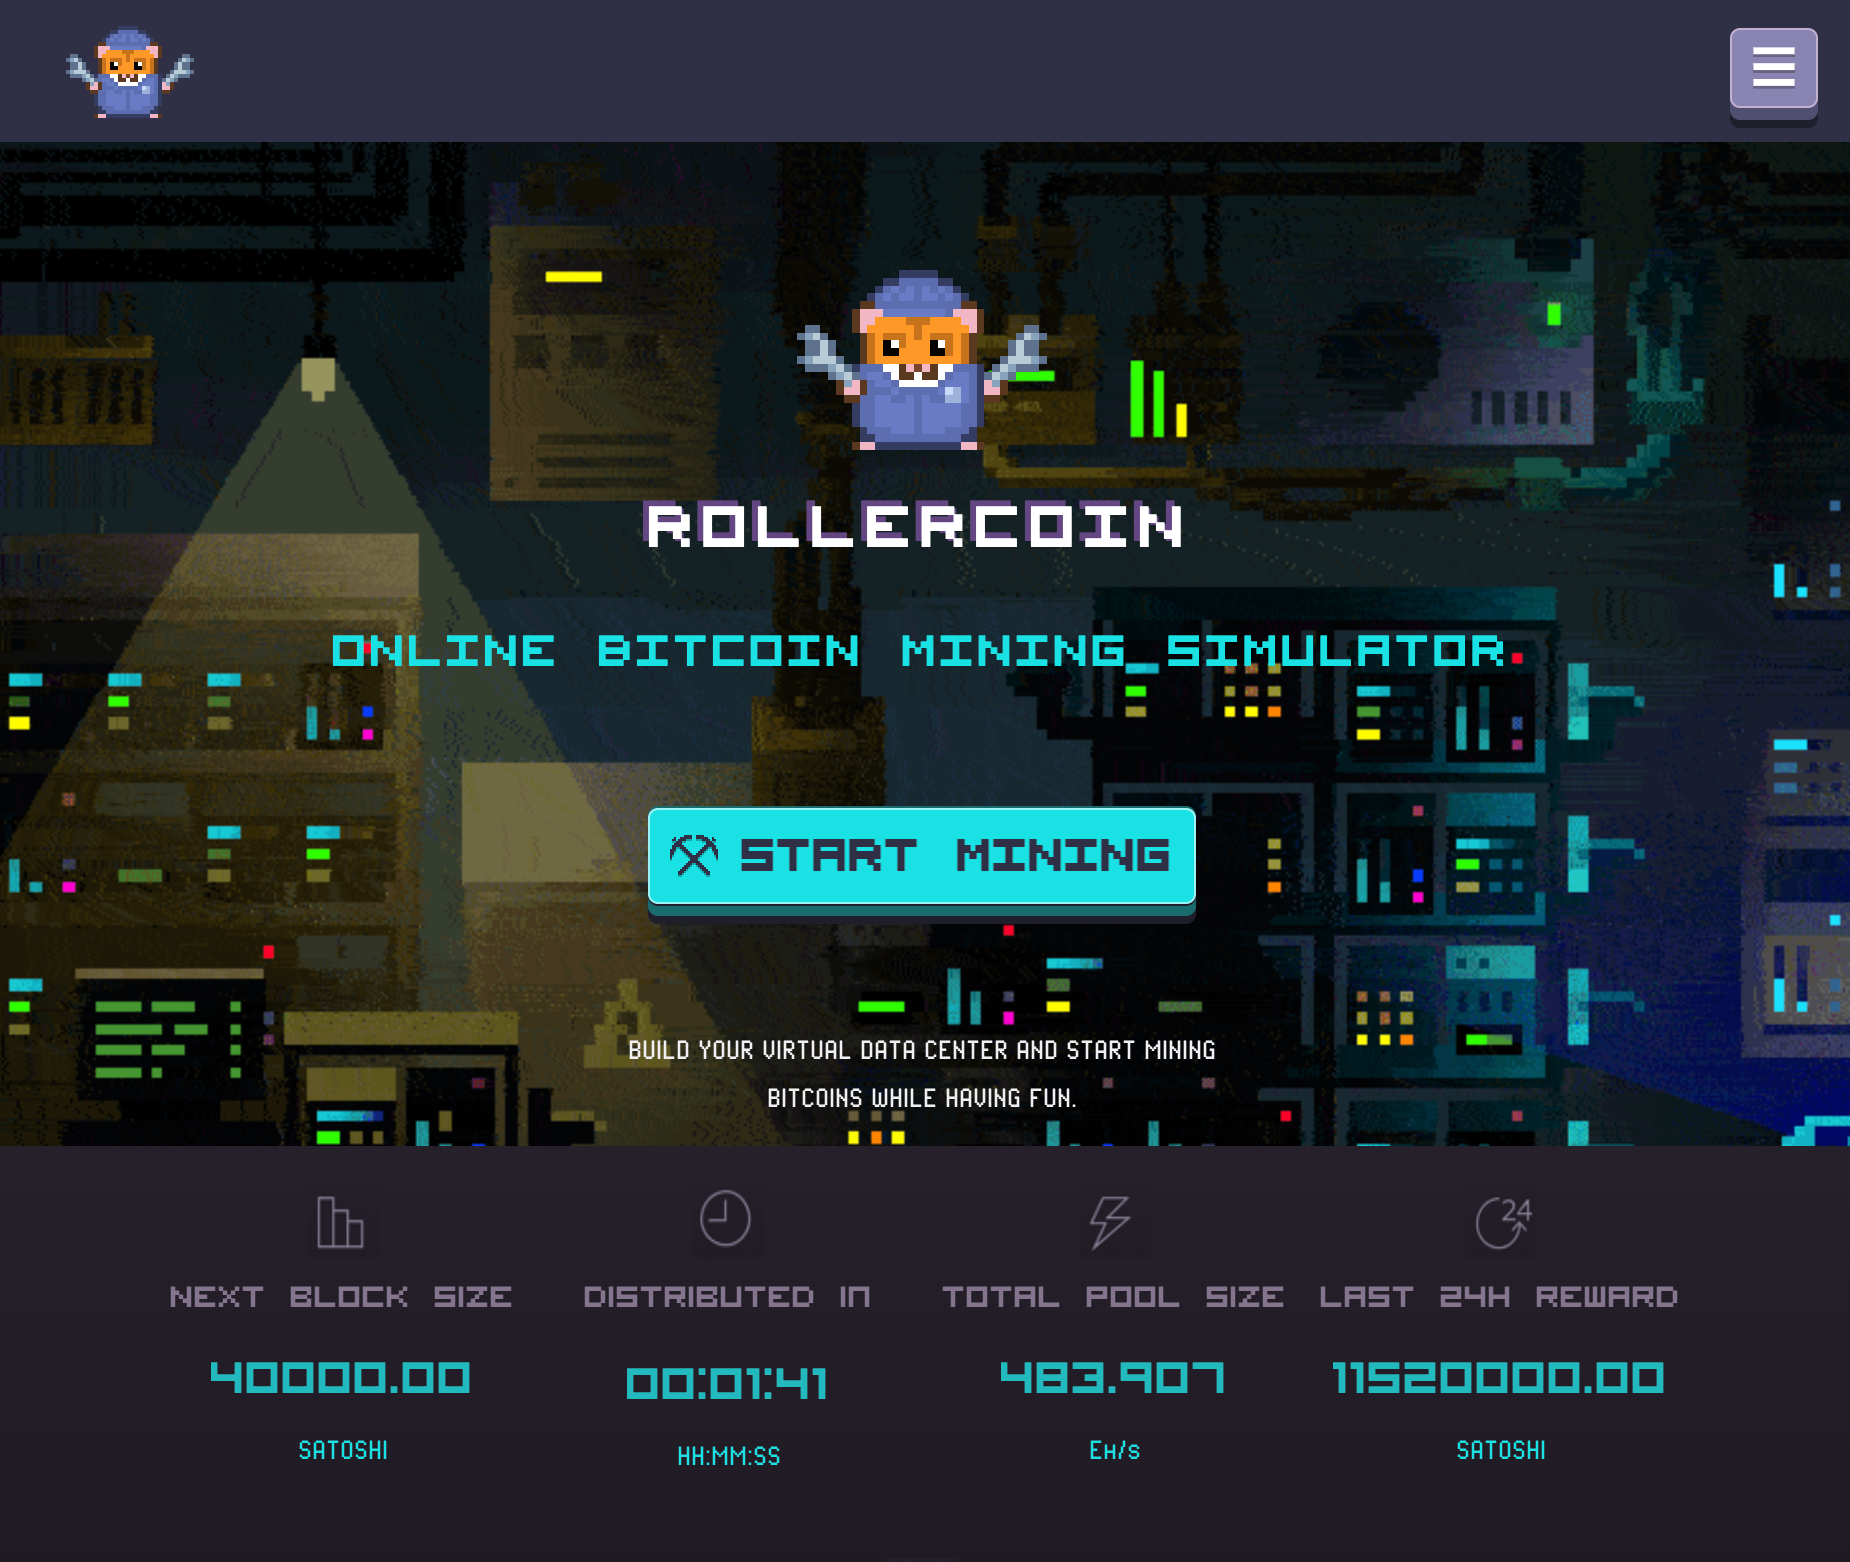 7 Highest Paying Bitcoin Games for Android and iOS Users - Revenues & Profits